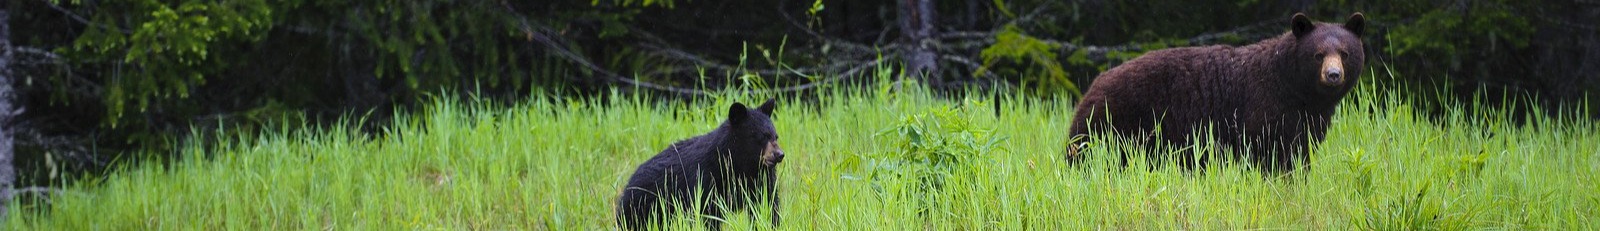 Black bear mother and cubs feeding on grass and clover in the rain